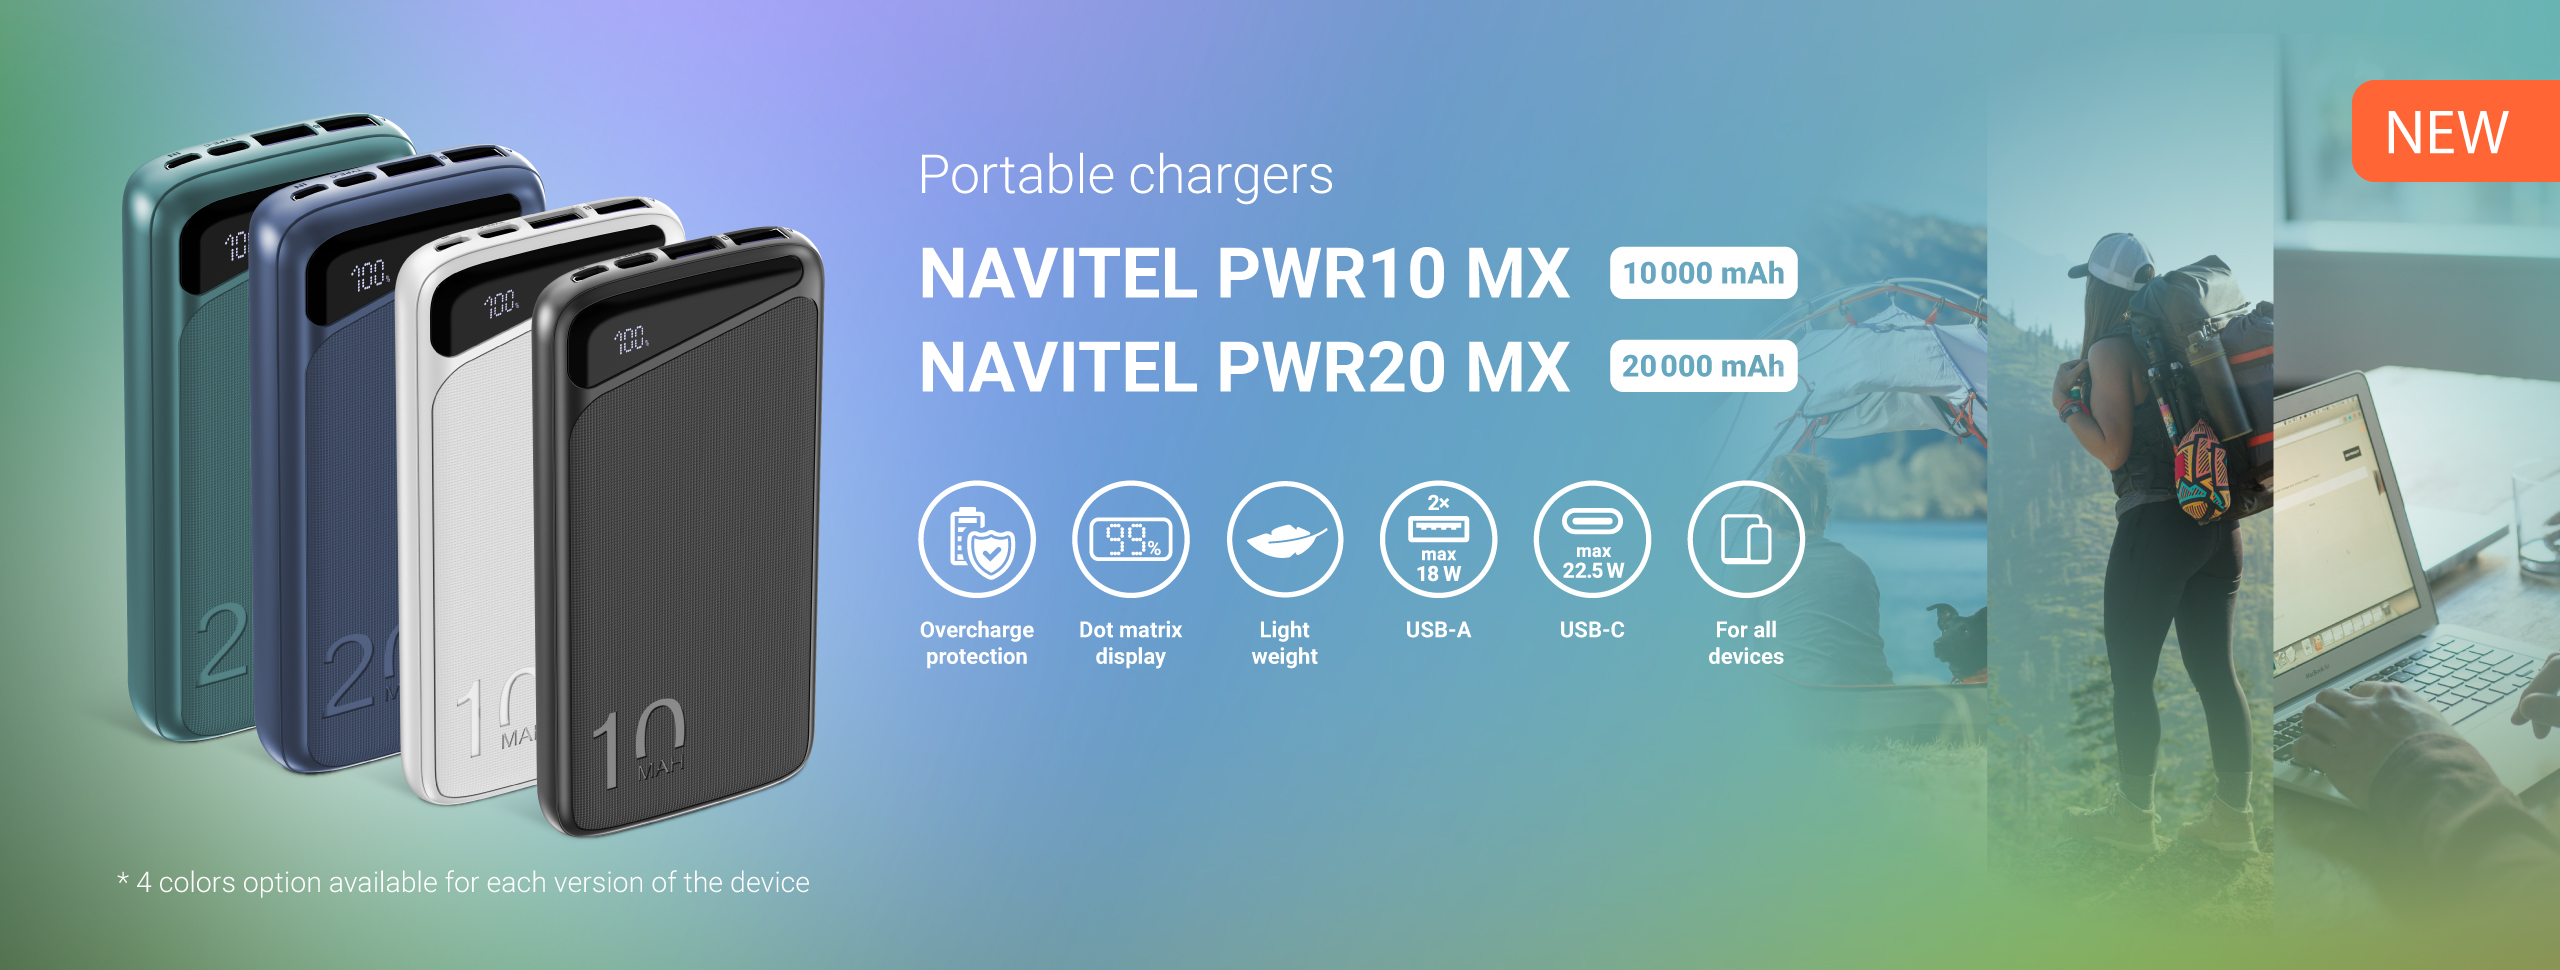 New devices from NAVITEL: chargers and powerbanks